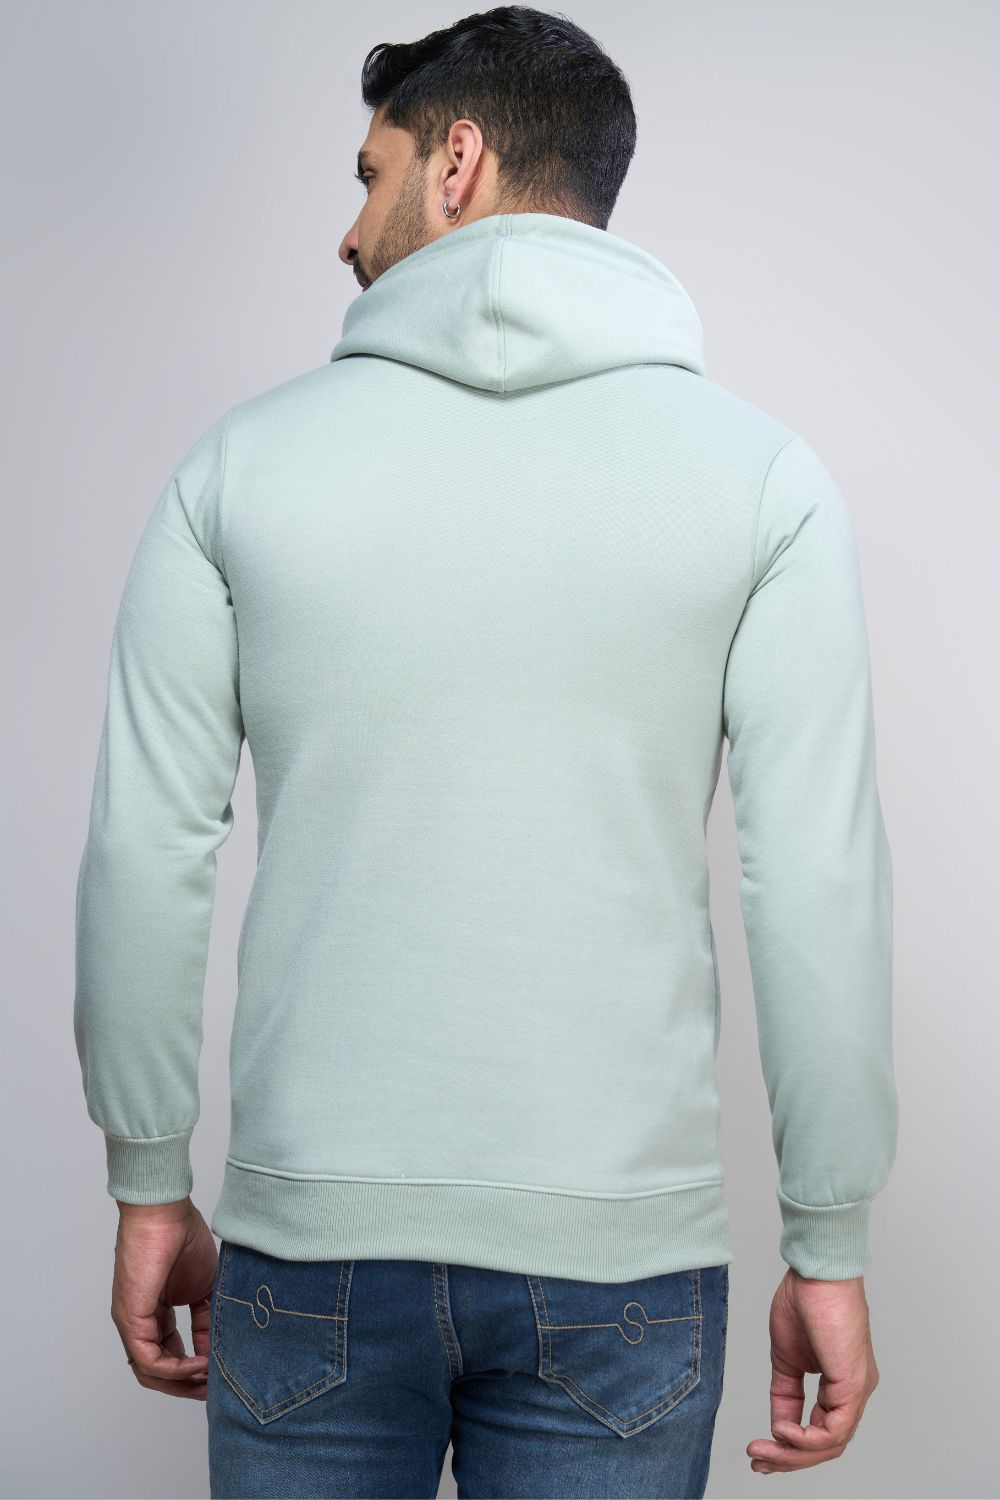 Sea Green colored, hoodie for men with full sleeves and relaxed fit, back view.